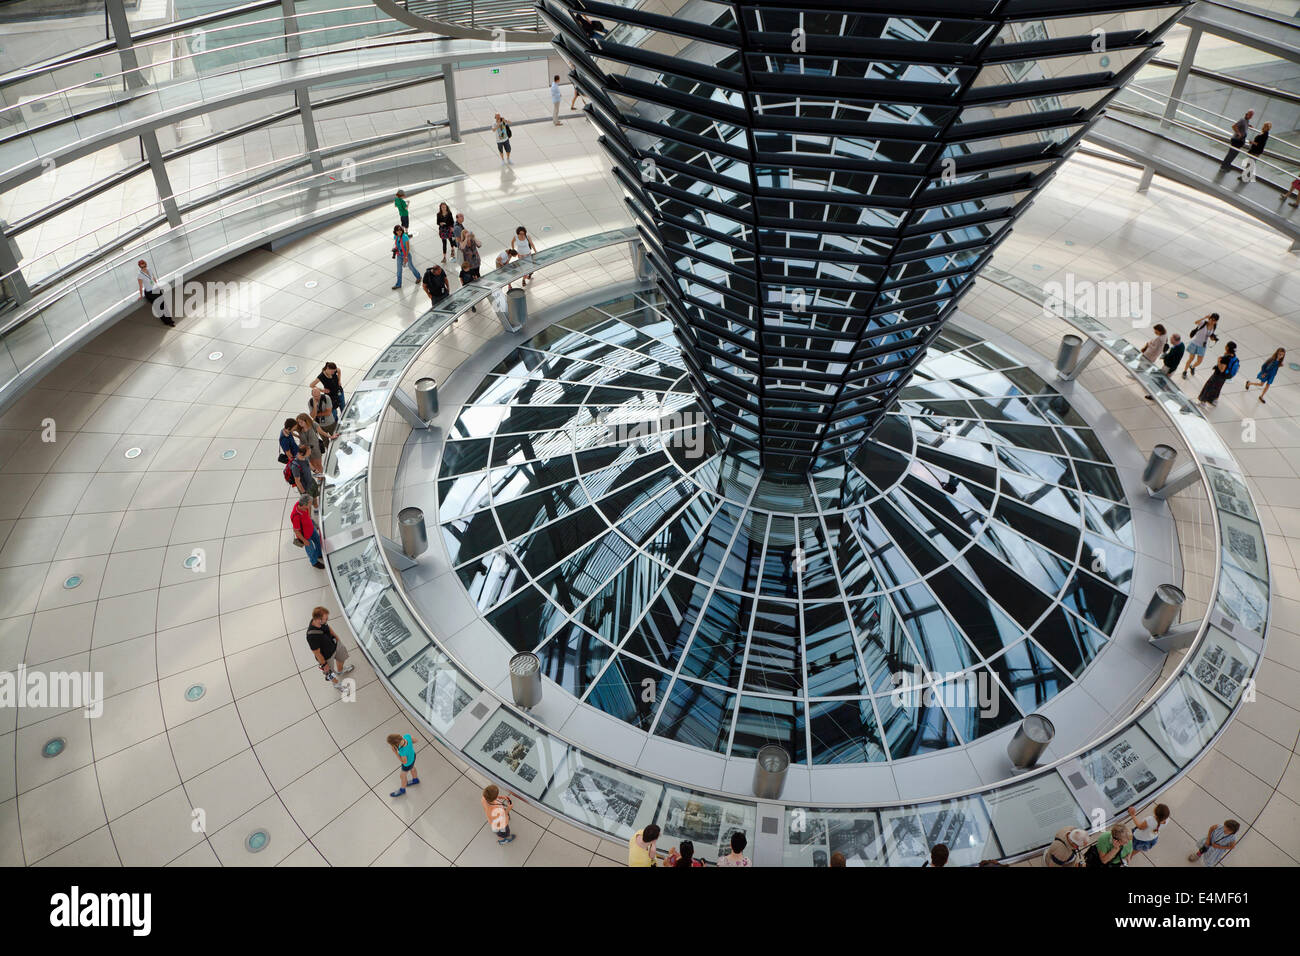 Germany, Berlin, Mitte, Reichstag building with glass dome deisgned by Norman Foster. Stock Photo